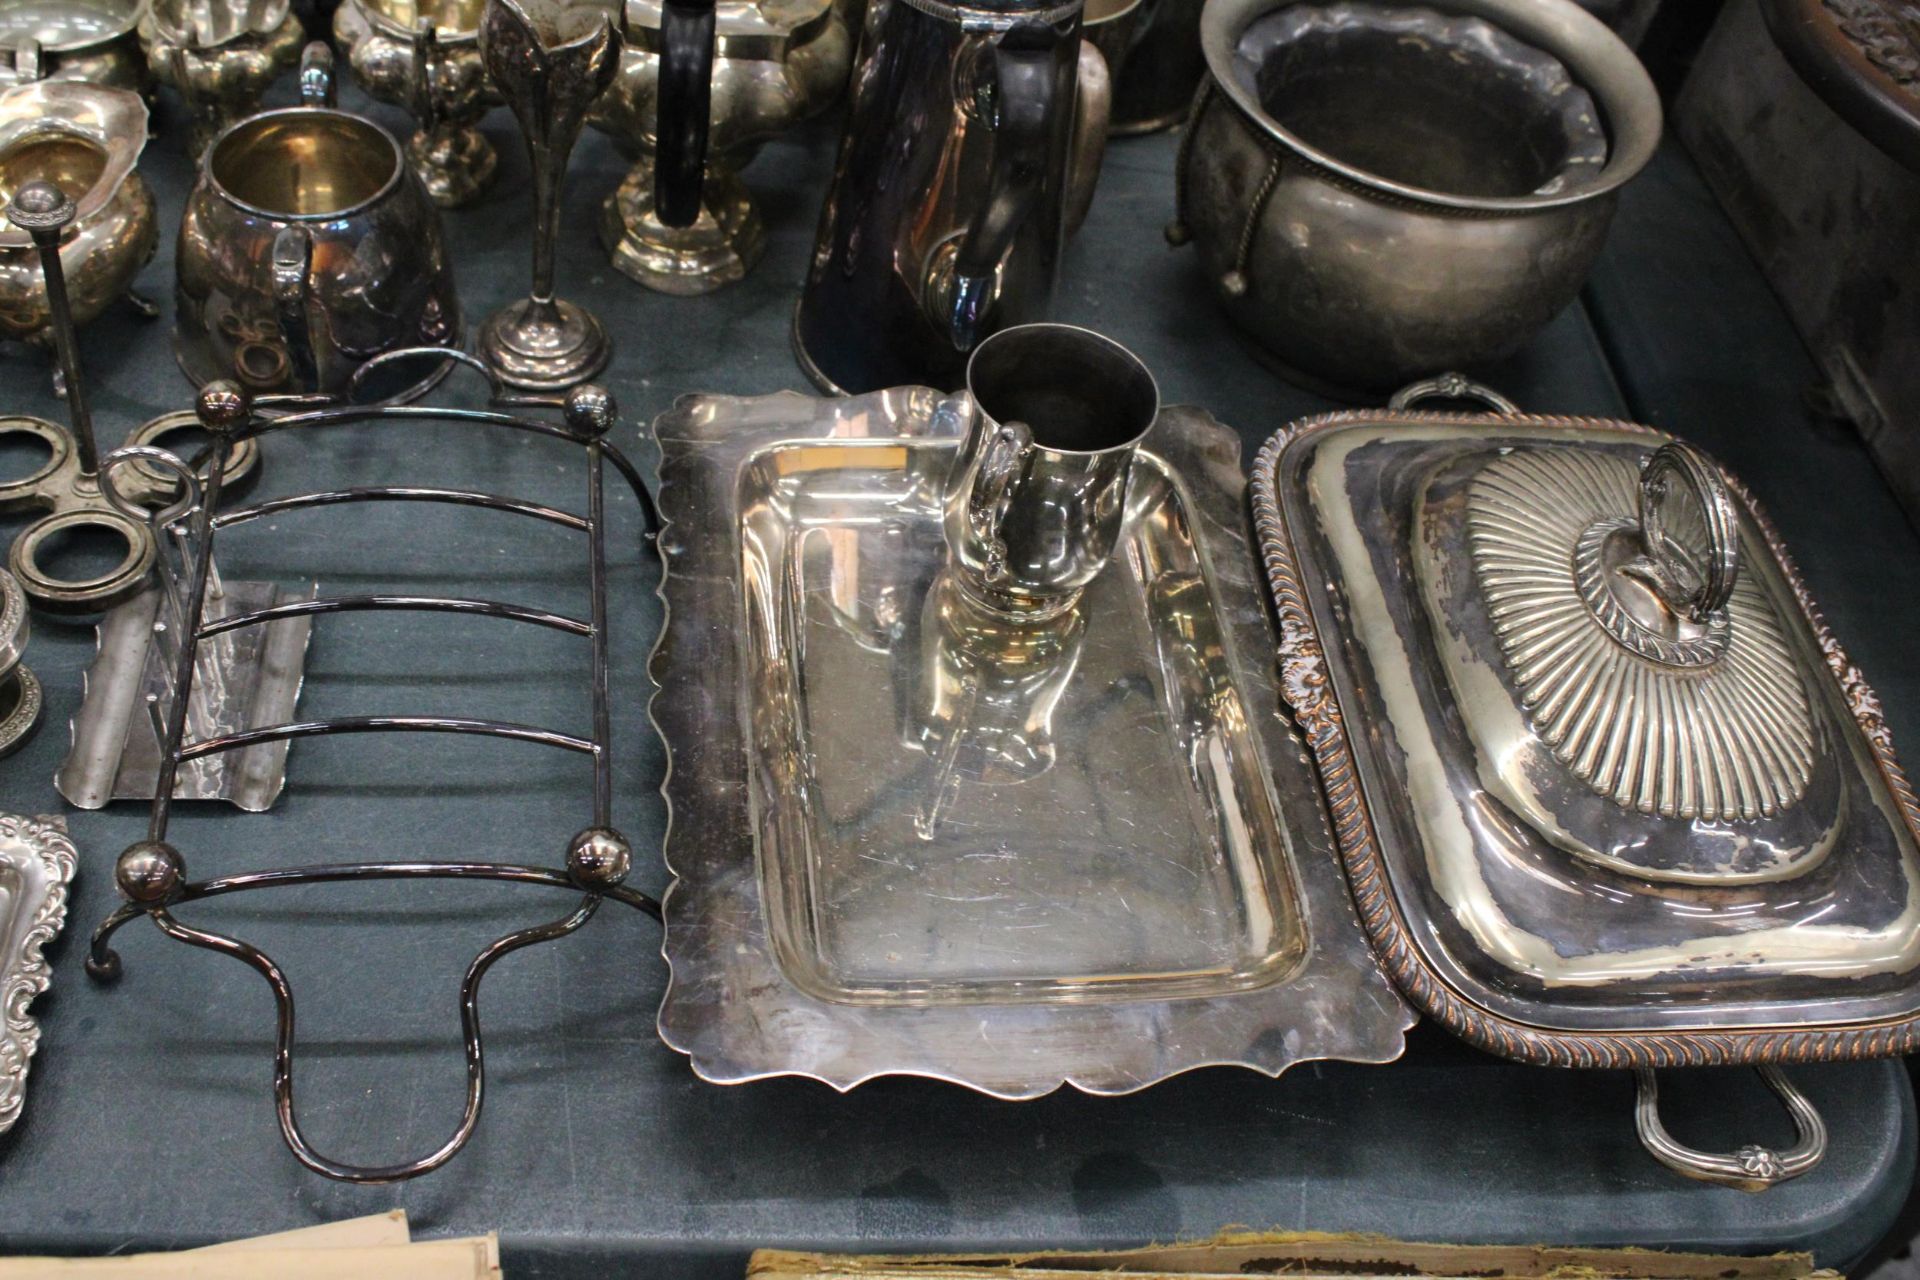 A VERY LARGE QUANTITY OF SILVER PLATED ITEMS TO INCLUDE TEAPOTS, COFFEE POTS, SERVING DISHES, - Image 5 of 6